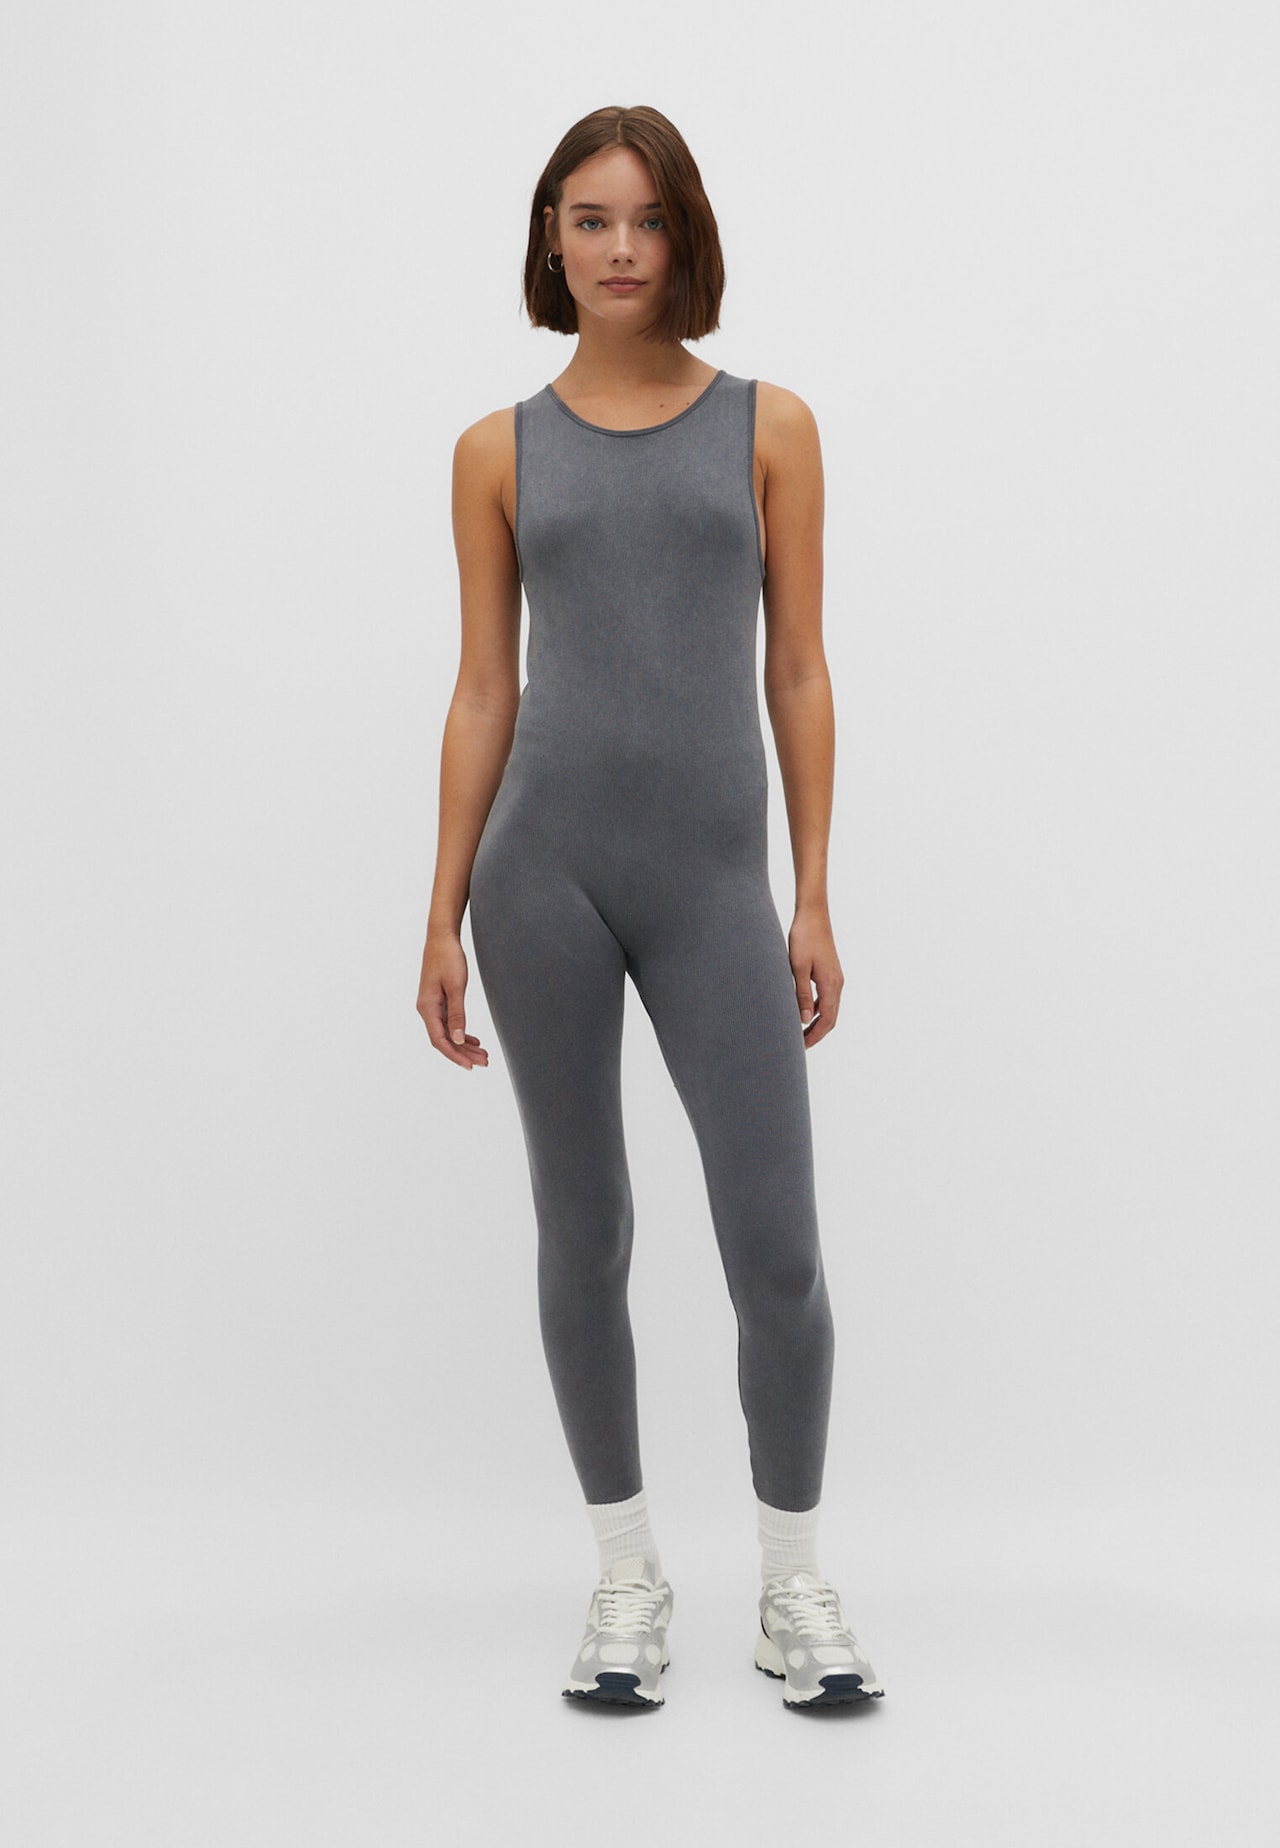 Seamless jumpsuit with low-cut back